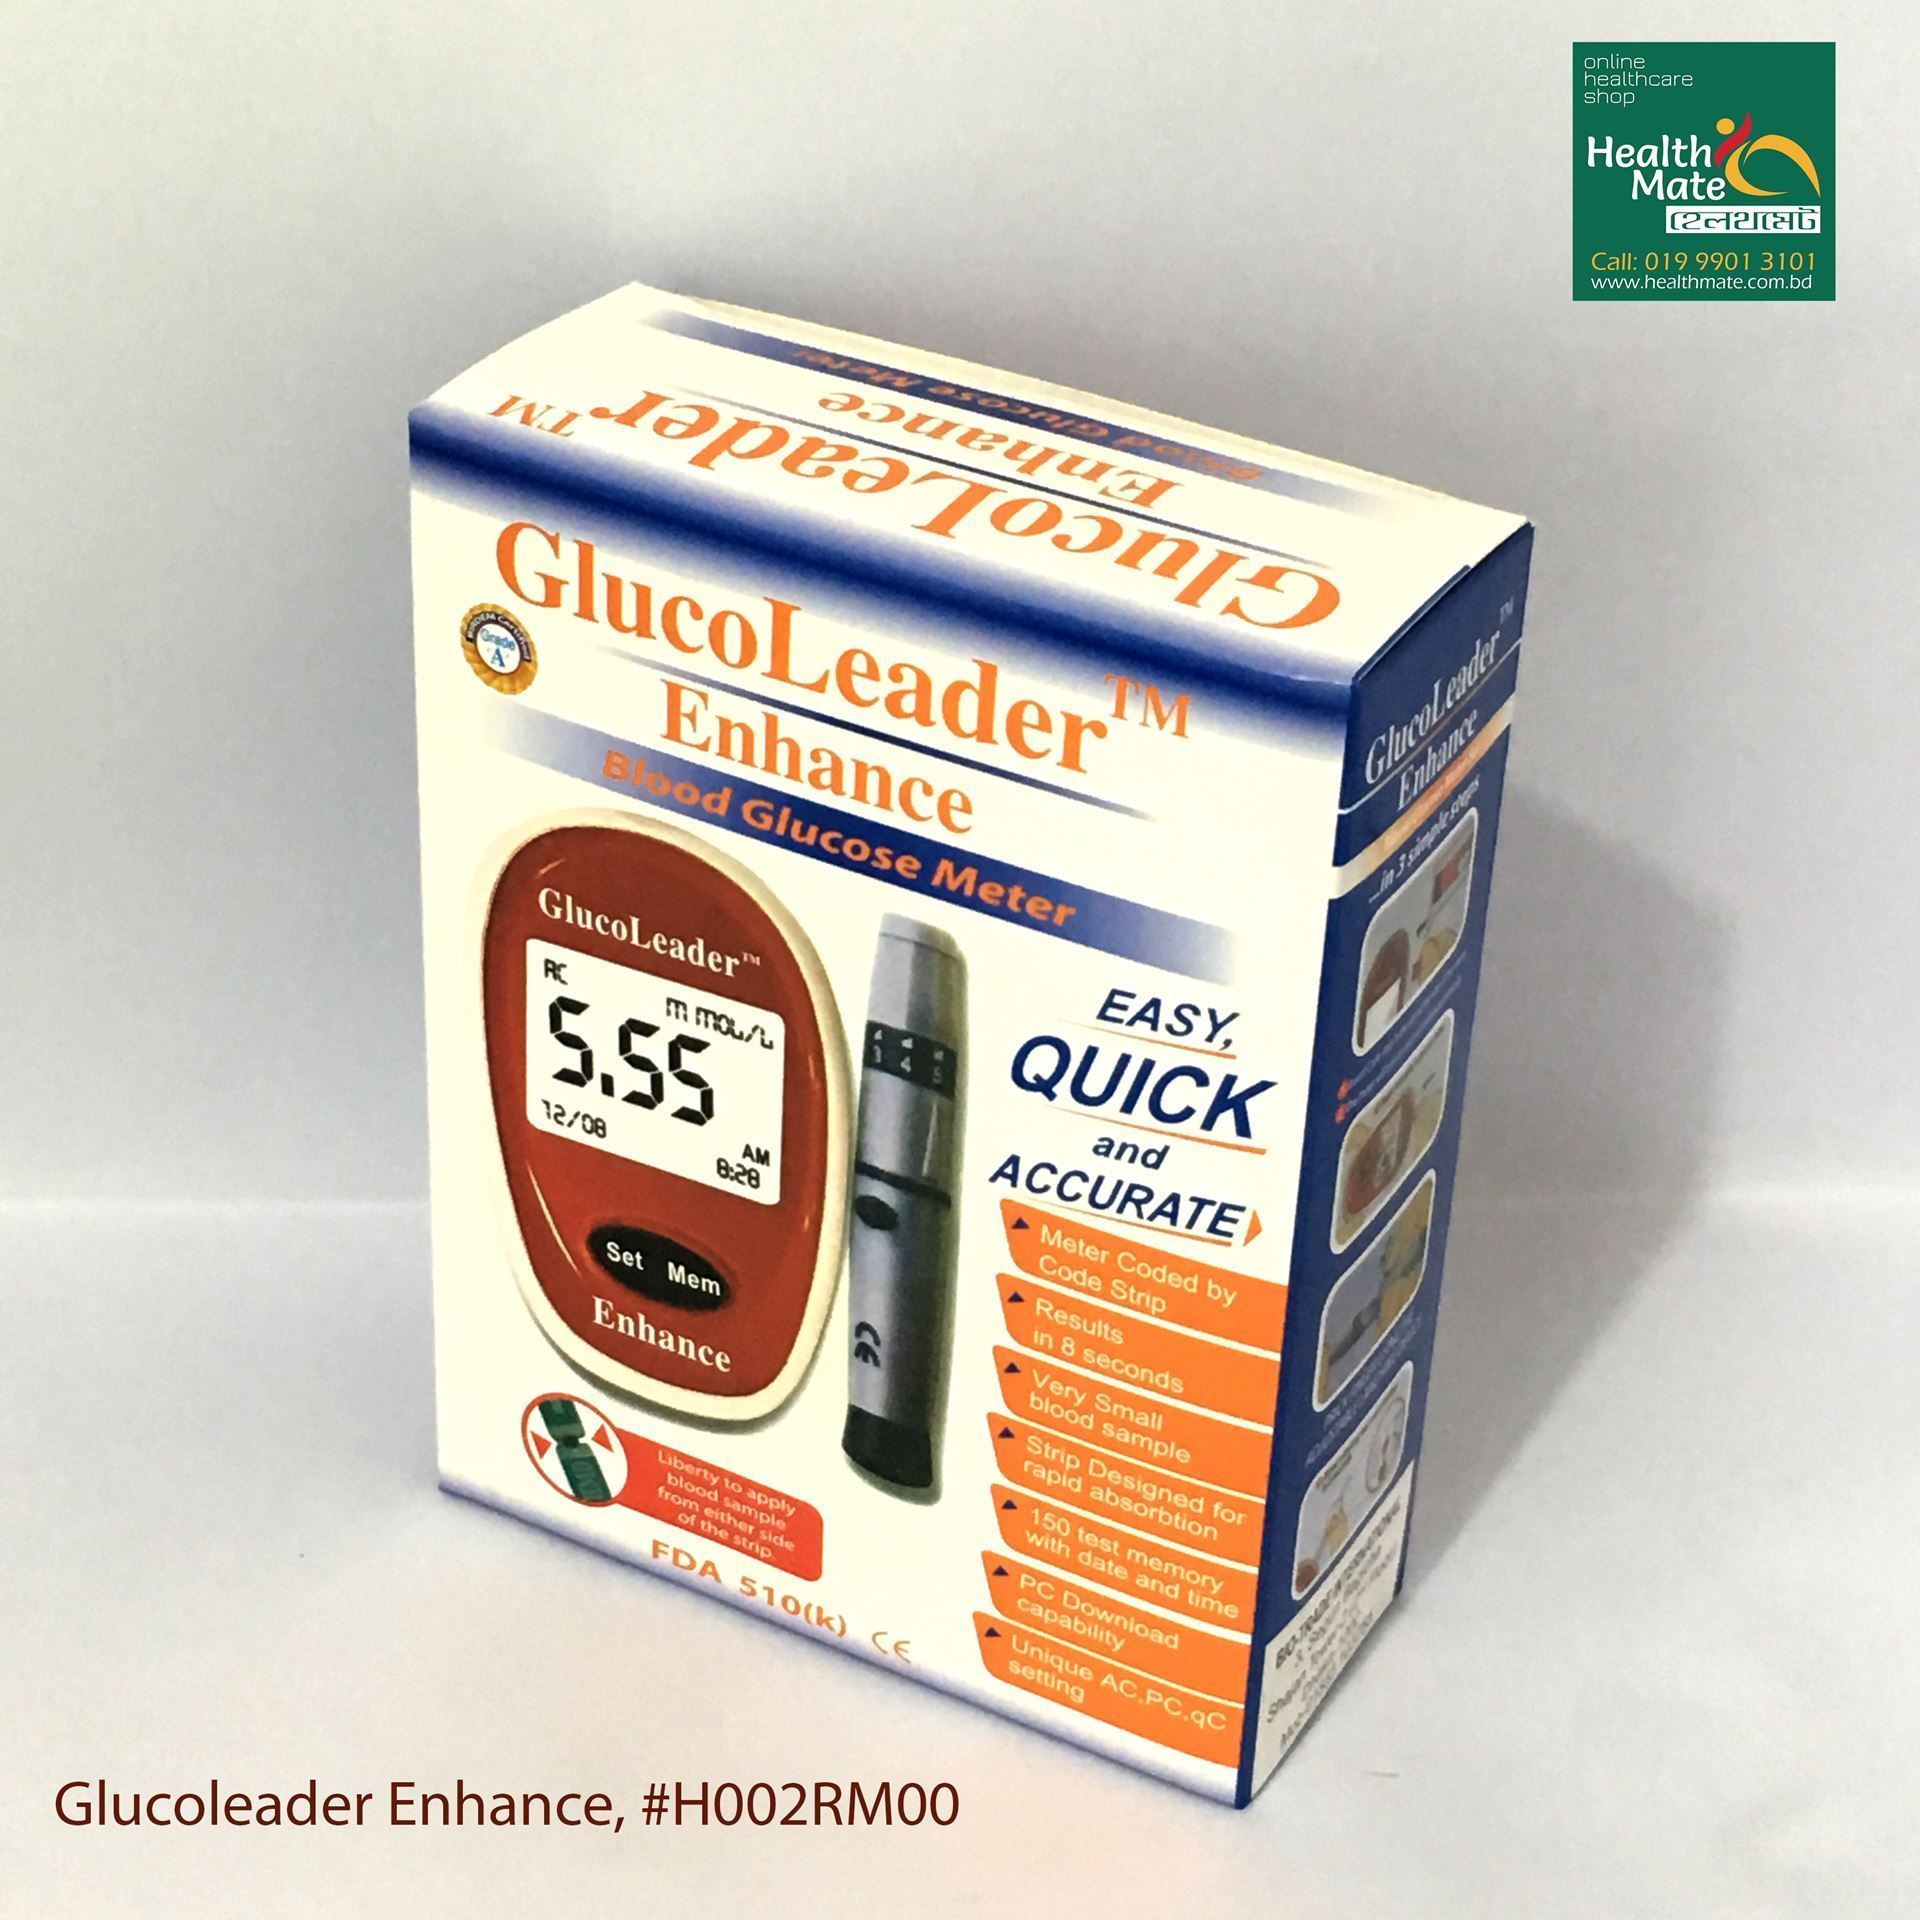 Glucoleader Enhance Red, Automatic Blood Glucose Meter